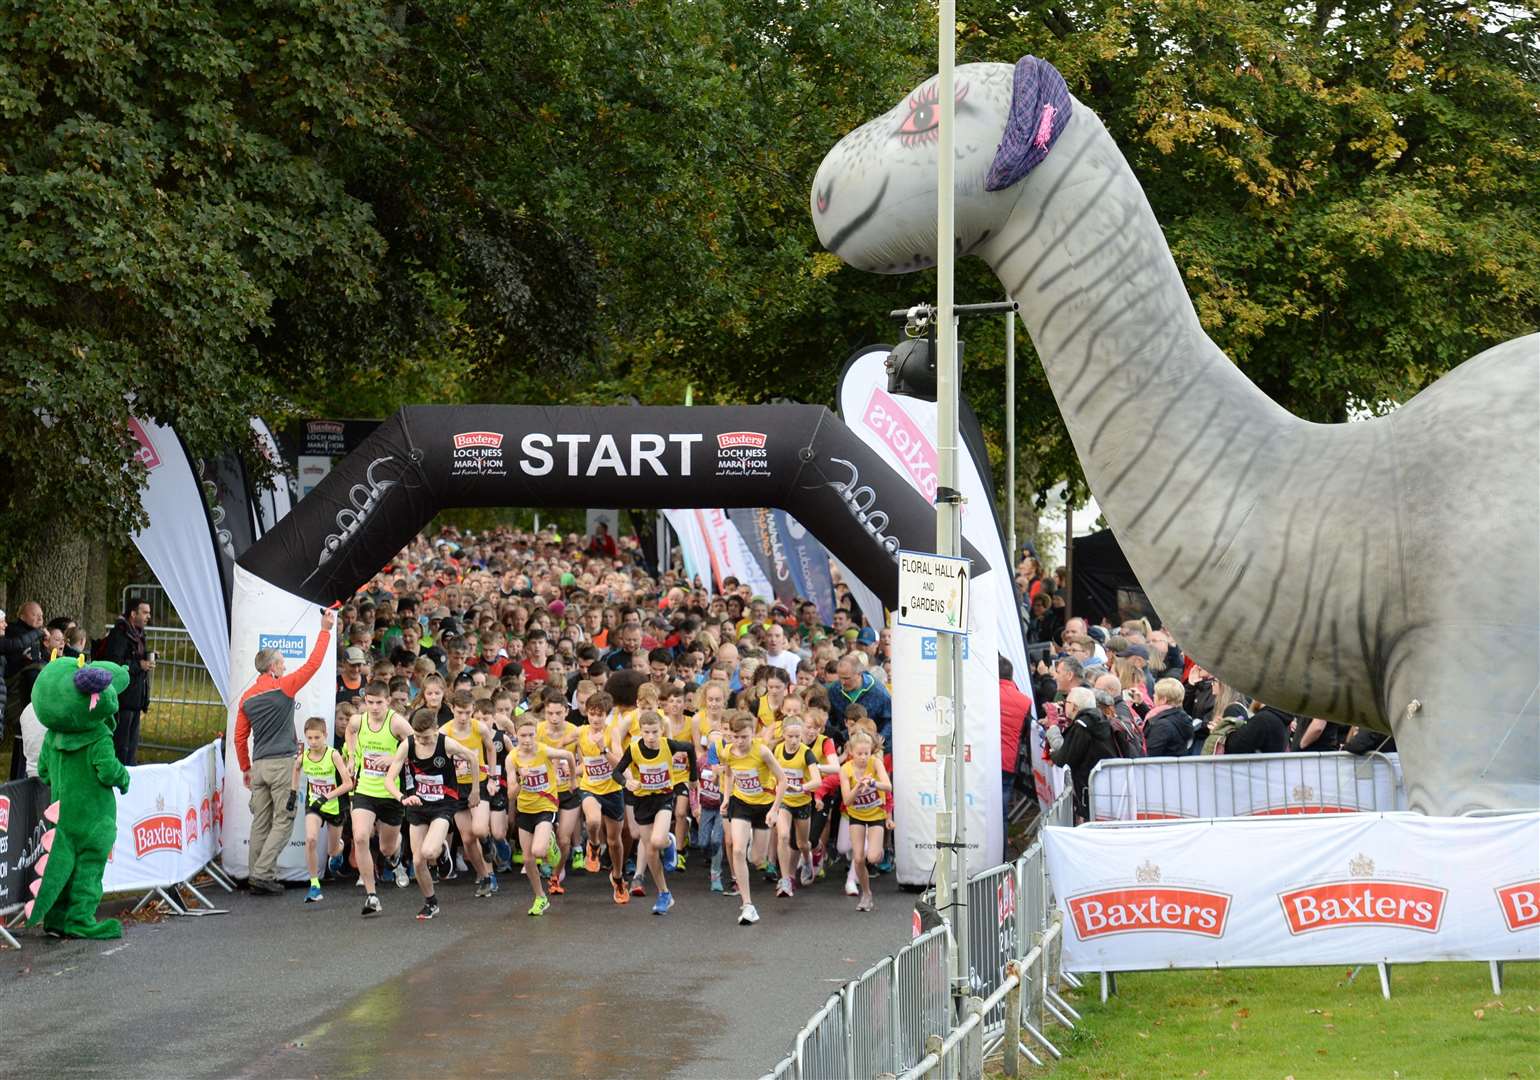 The start of a previous race at the Baxters Loch Ness Marathon & Festival of Running.